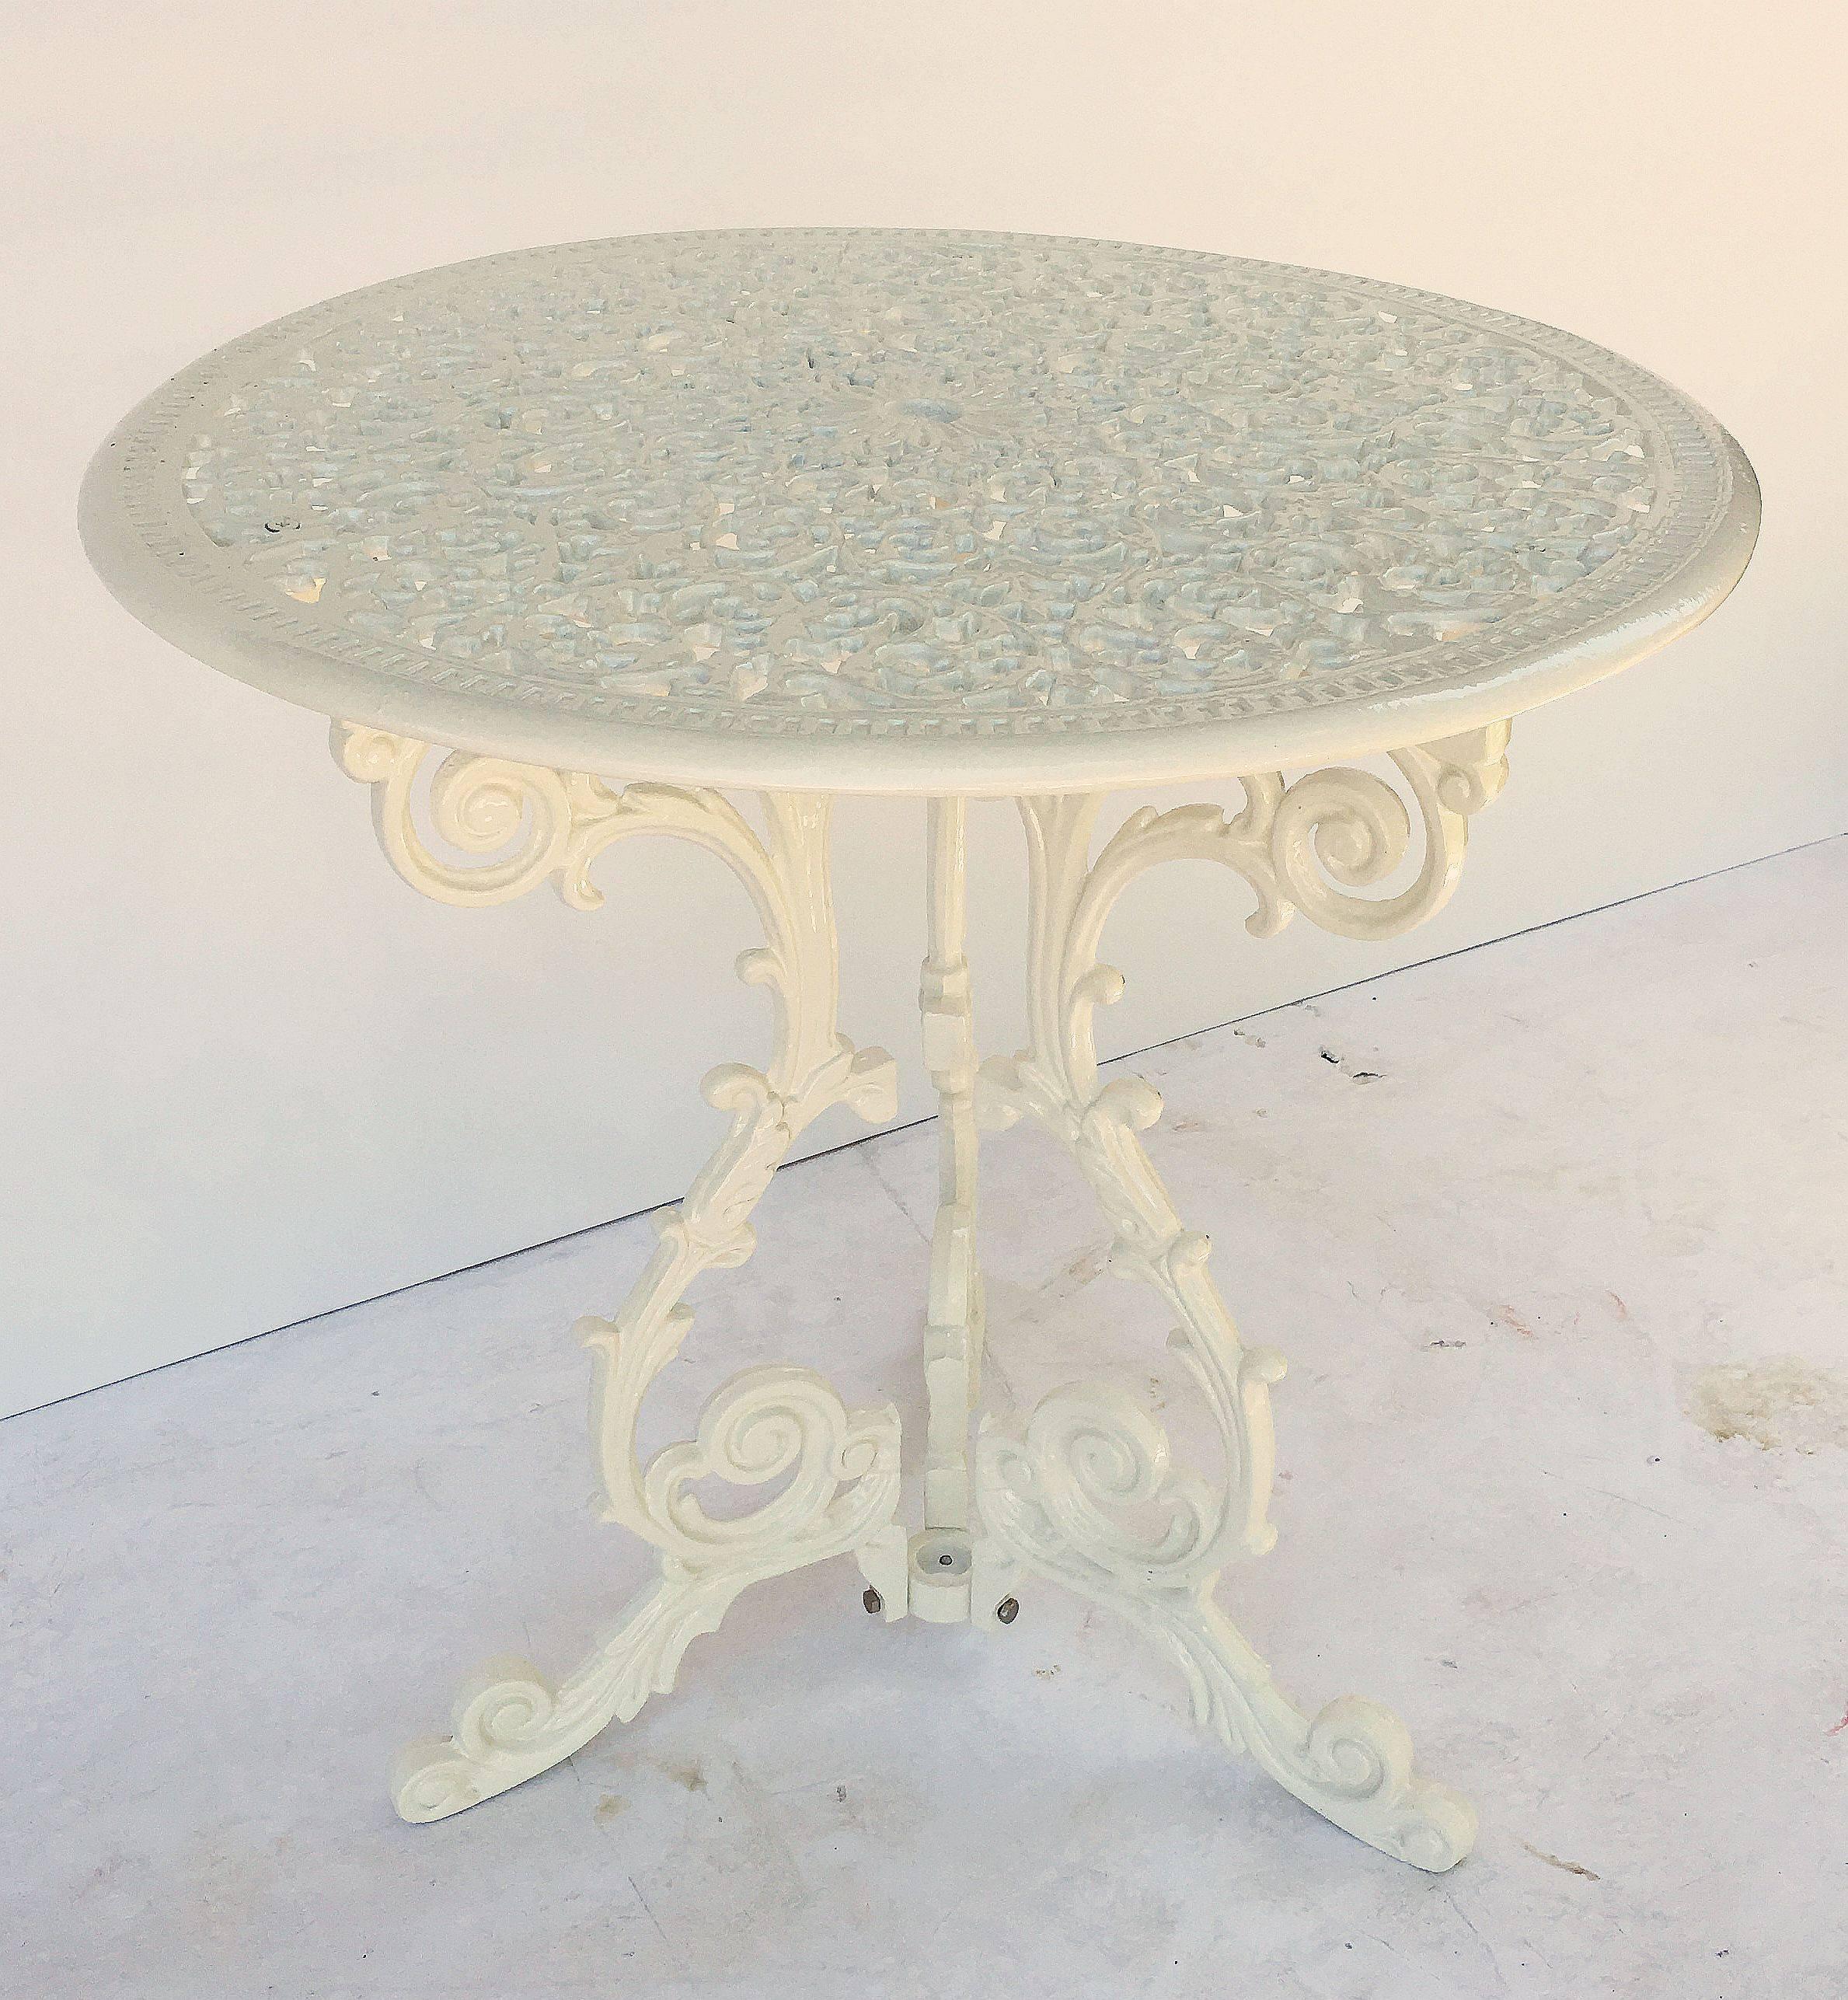 A fine English white-painted cafe´ or bistro table featuring a pierced decorative round or circular iron top, attached to a tripod base with serpentine legs.

Great for an outdoor patio or garden.

Measures: Height 27 1/2 inches x diameter 28